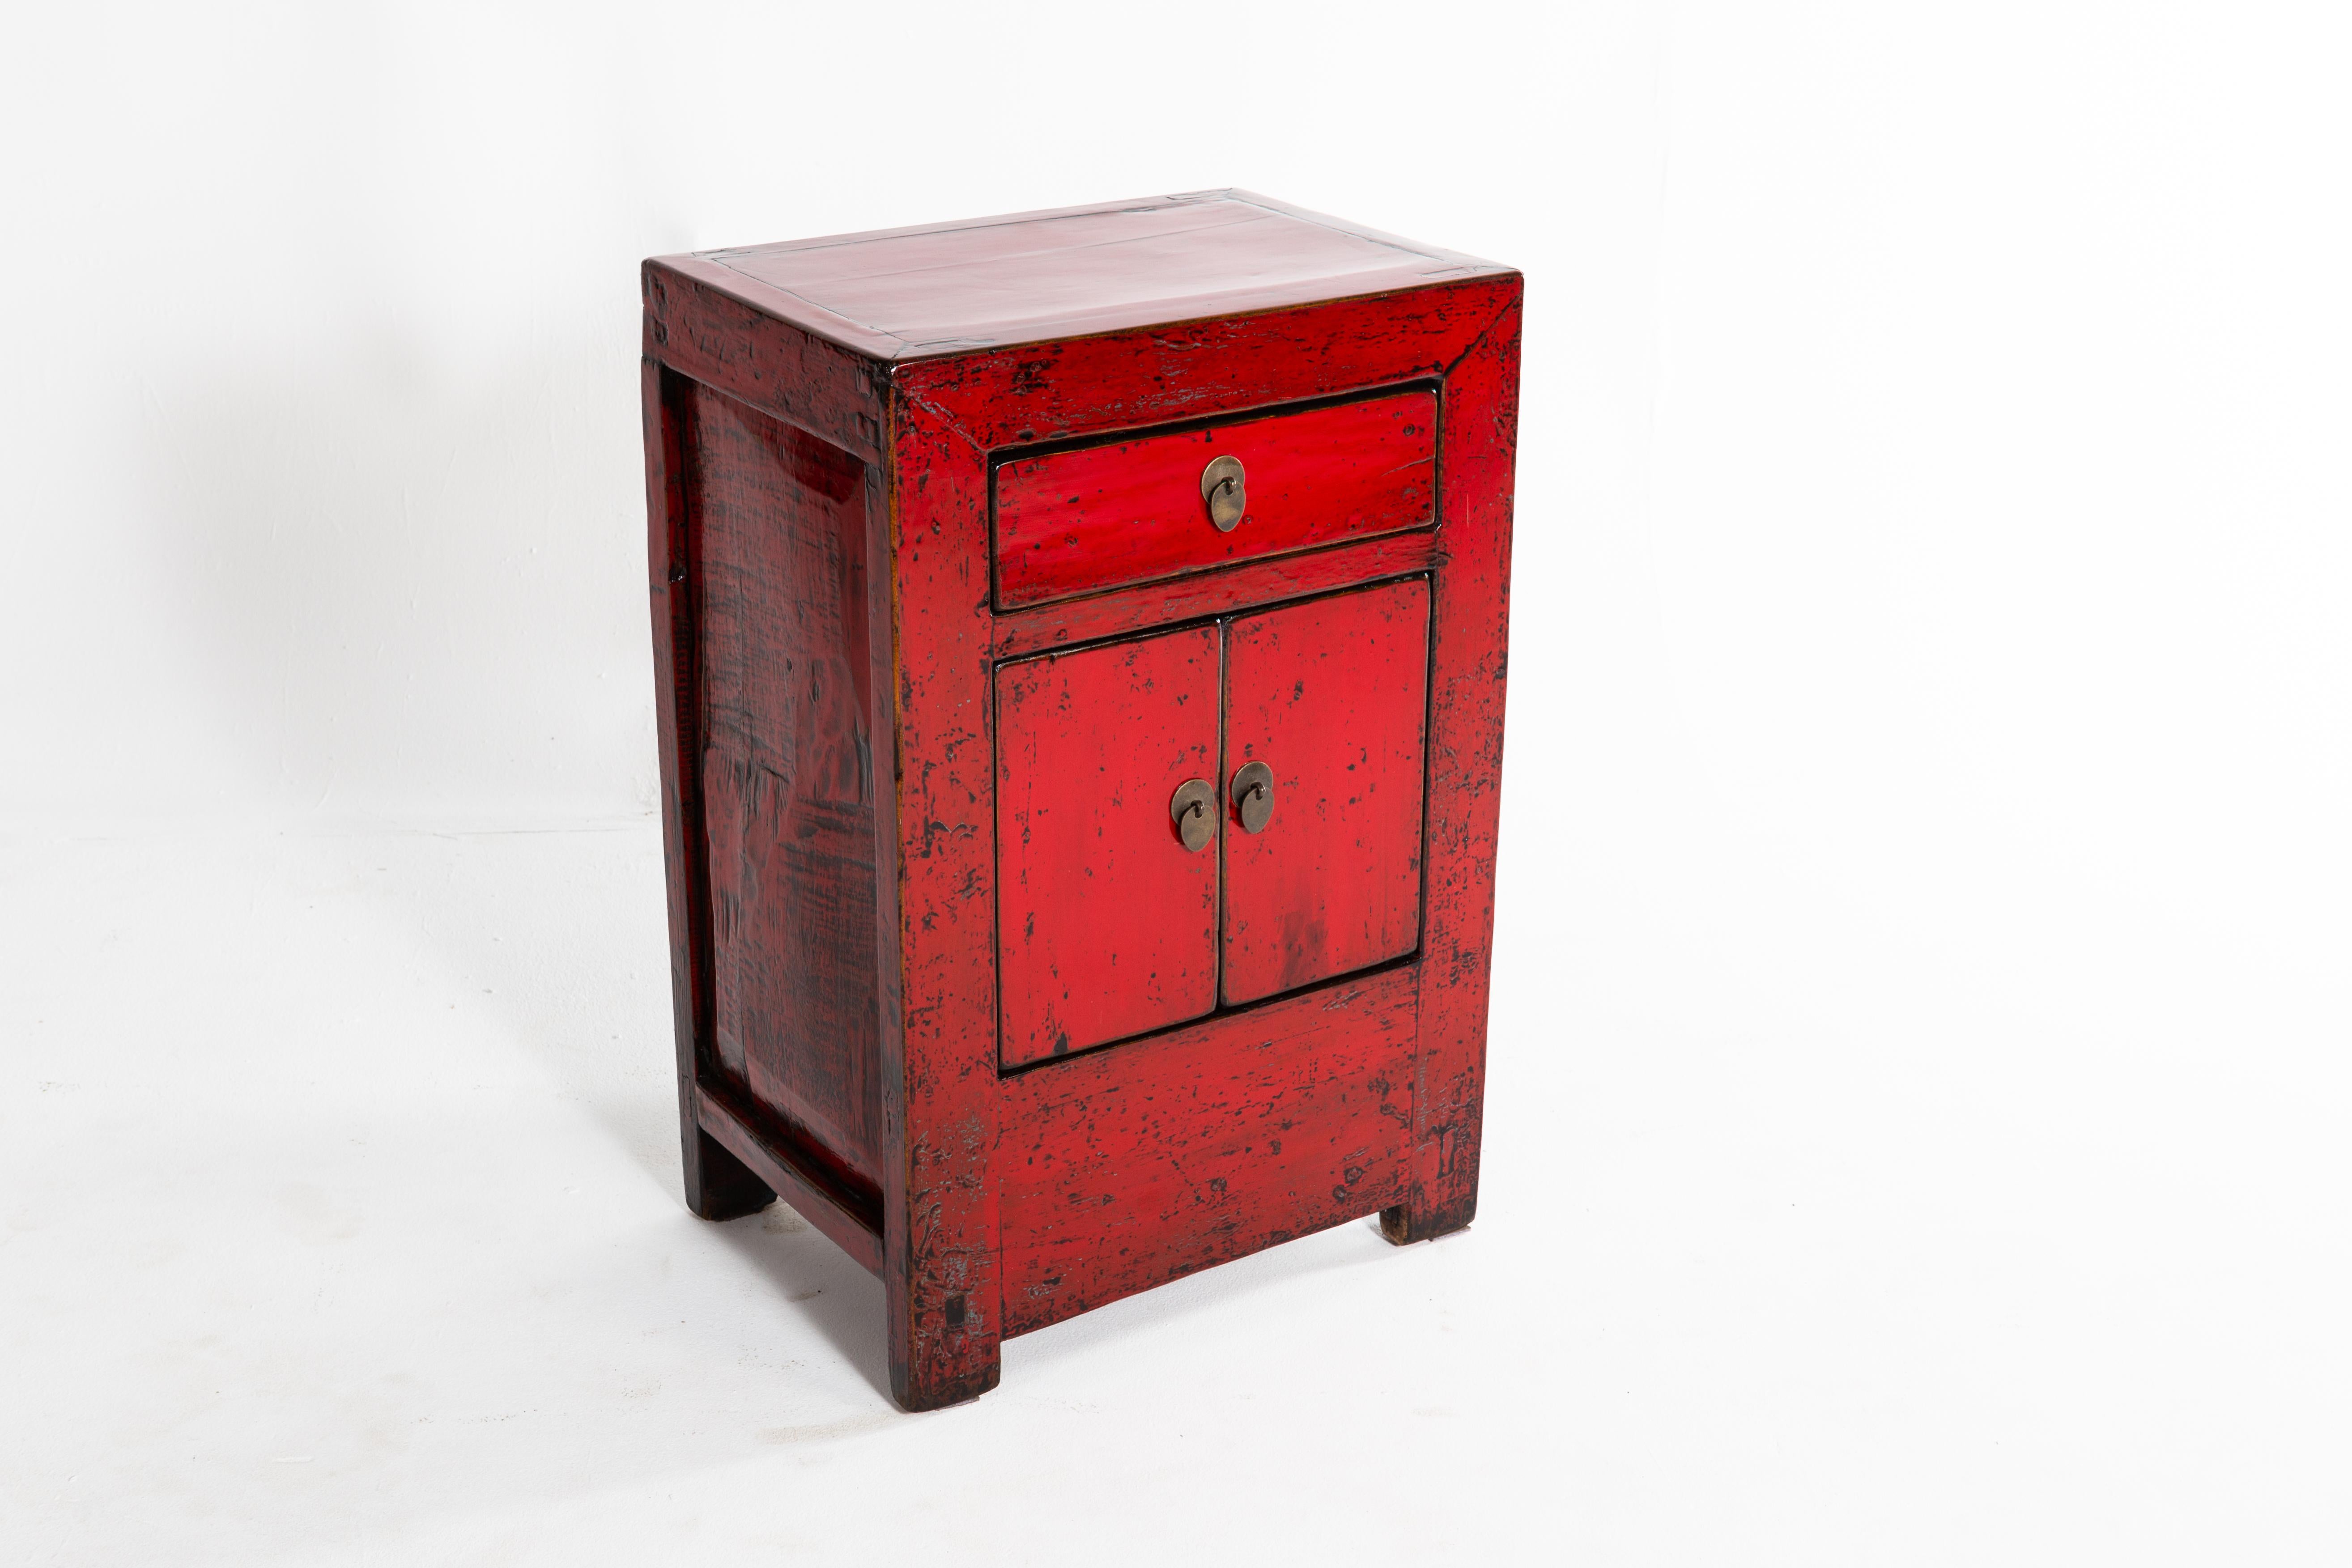 20th Century Red Lacquer Chinese Cabinet with a Drawer and Pair of Doors